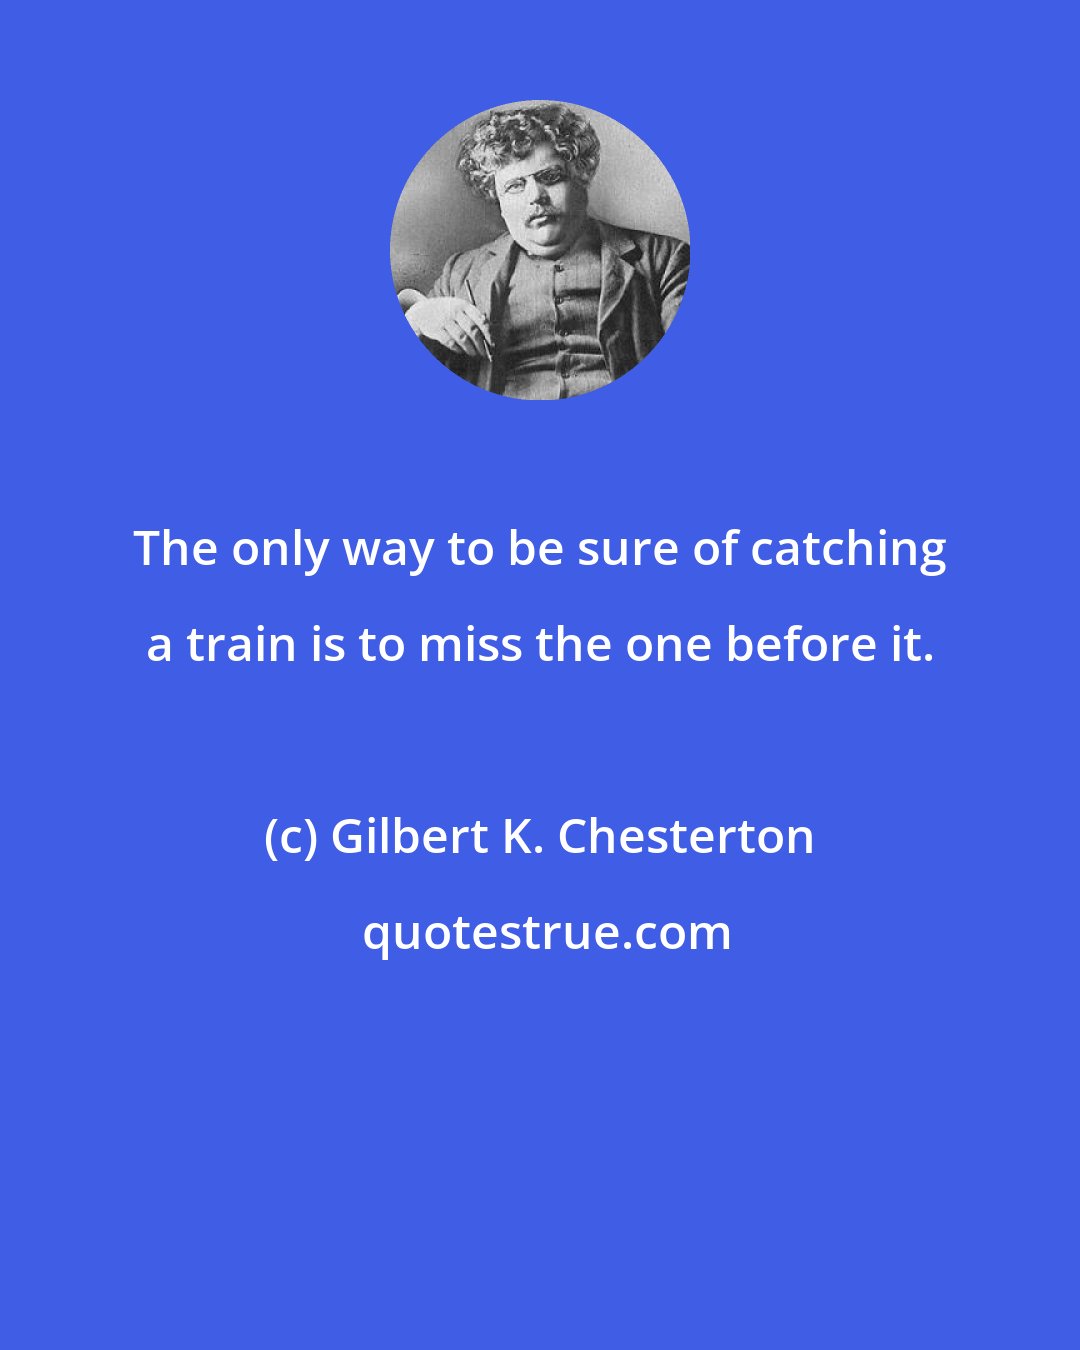 Gilbert K. Chesterton: The only way to be sure of catching a train is to miss the one before it.